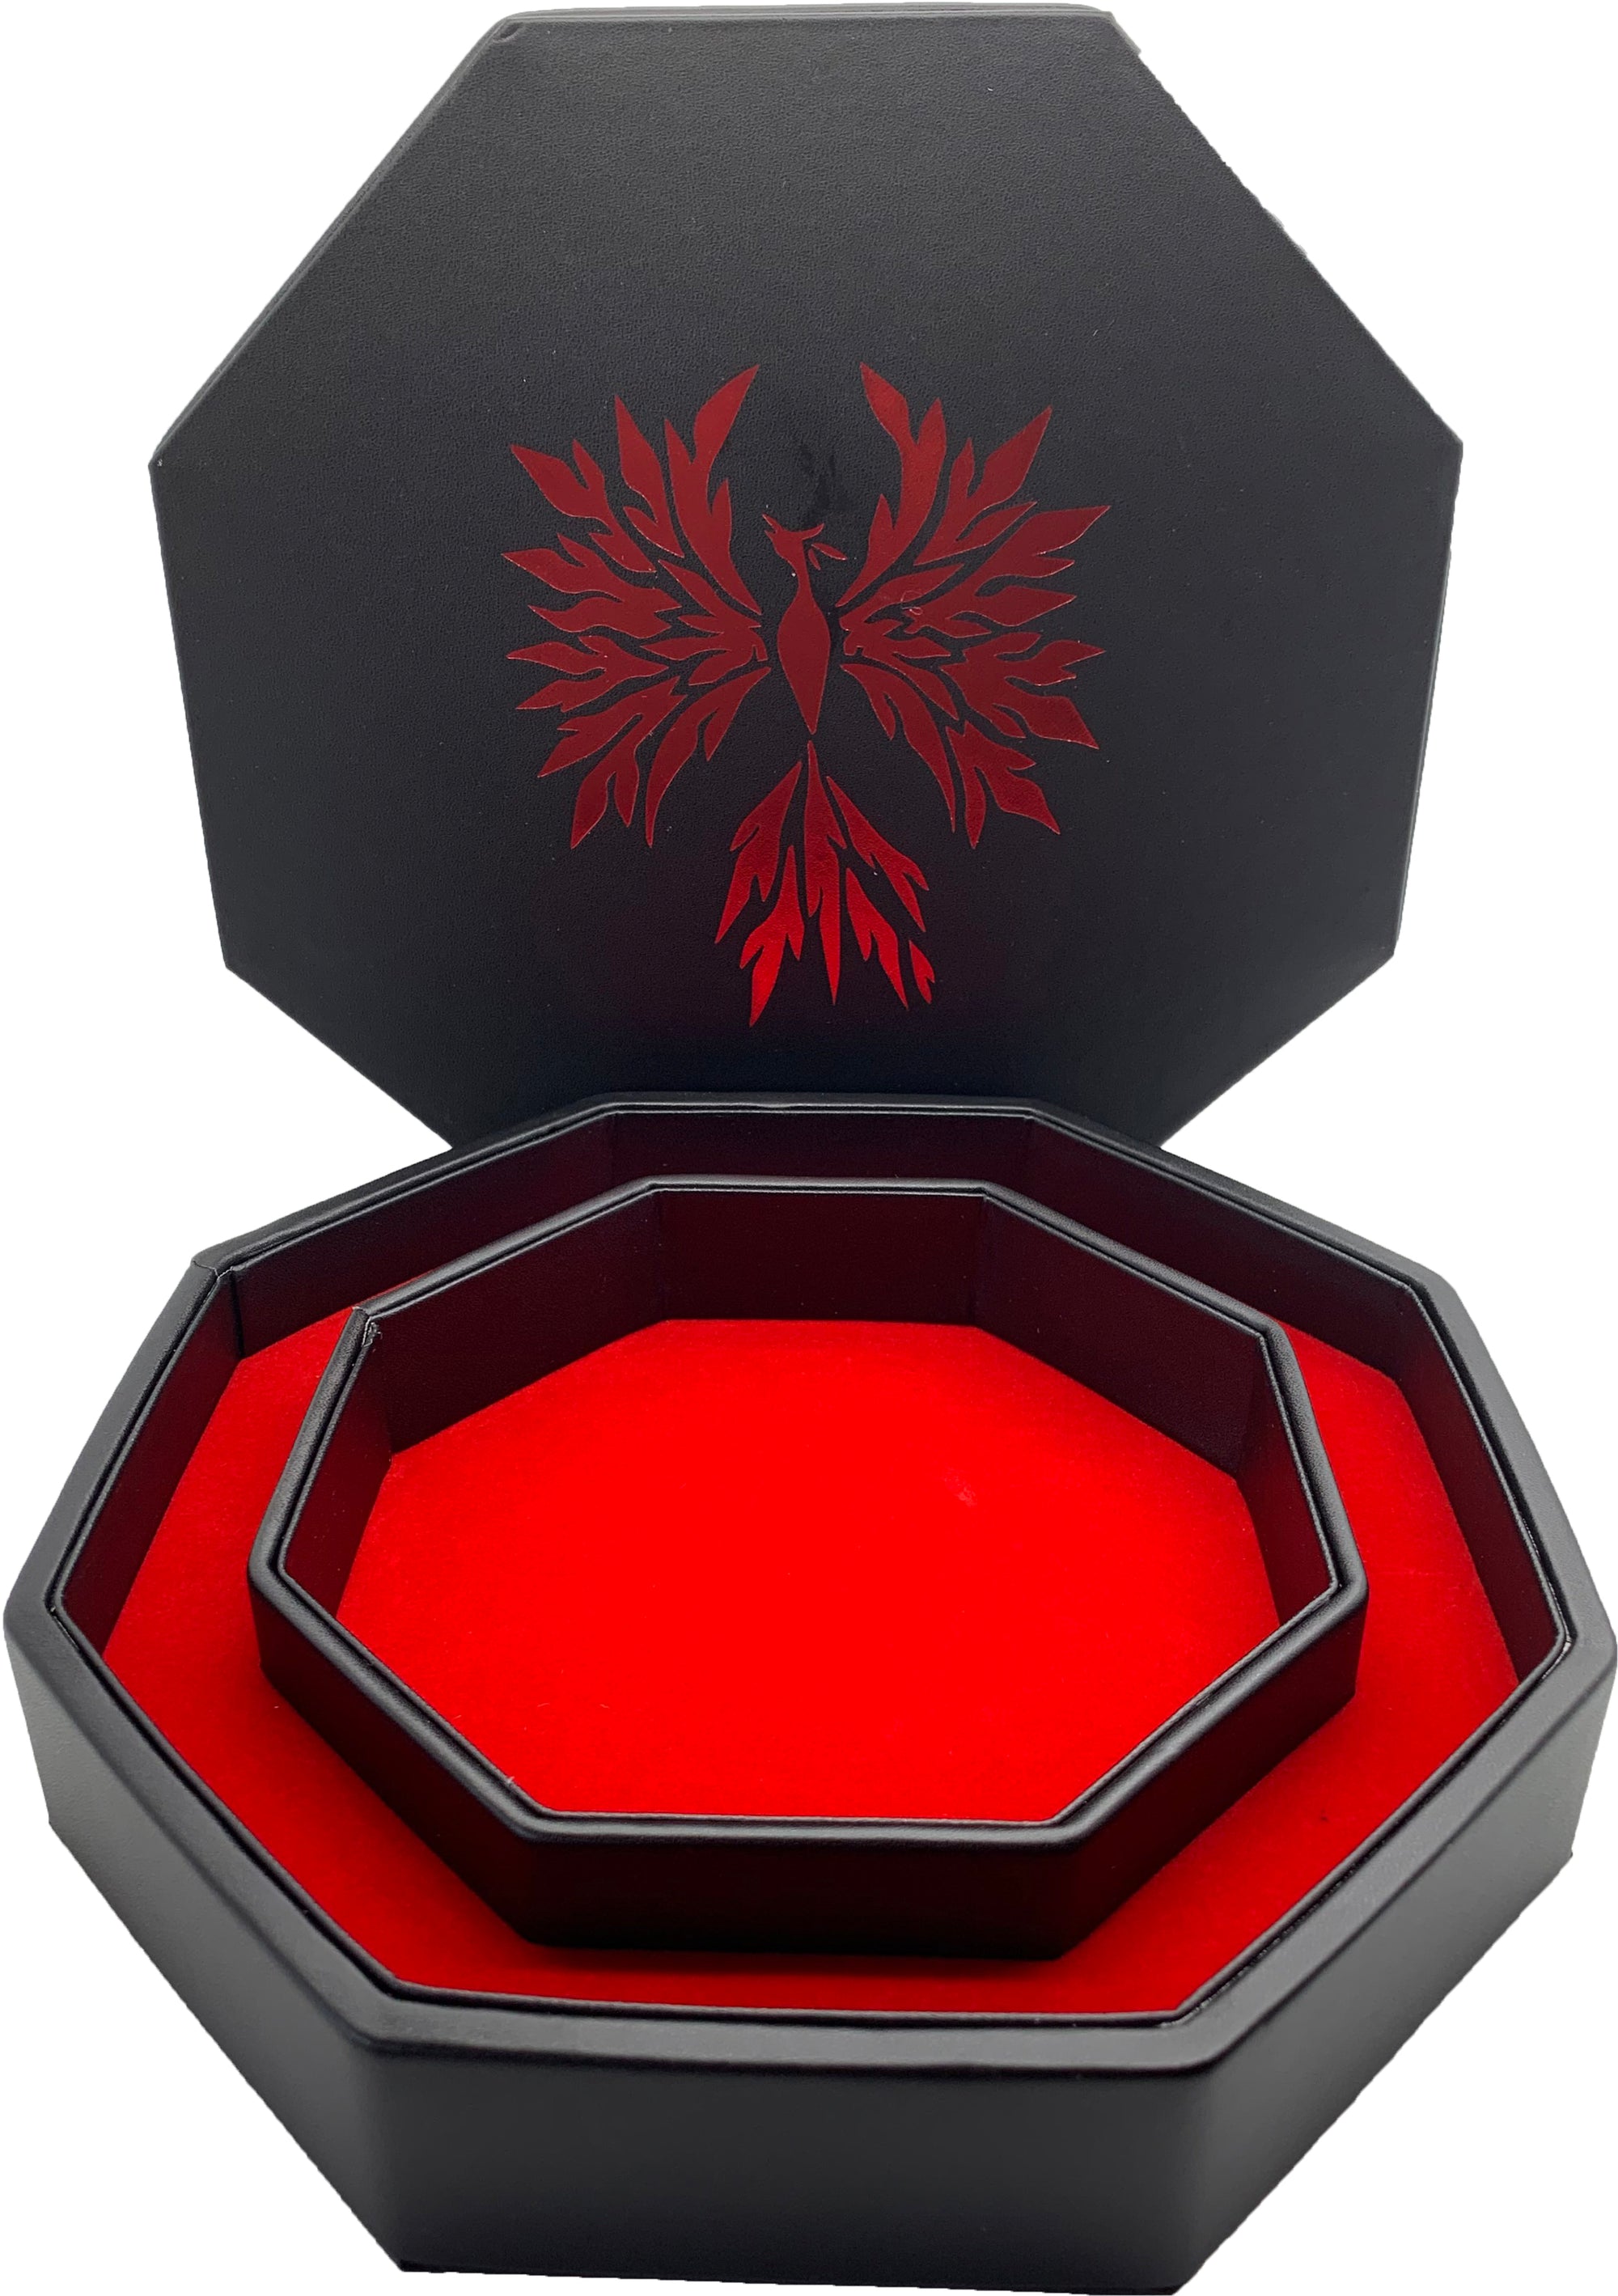 Red Phoenix - Tray of Holding™ Dice Tray by Norse Foundry - NOR 03011